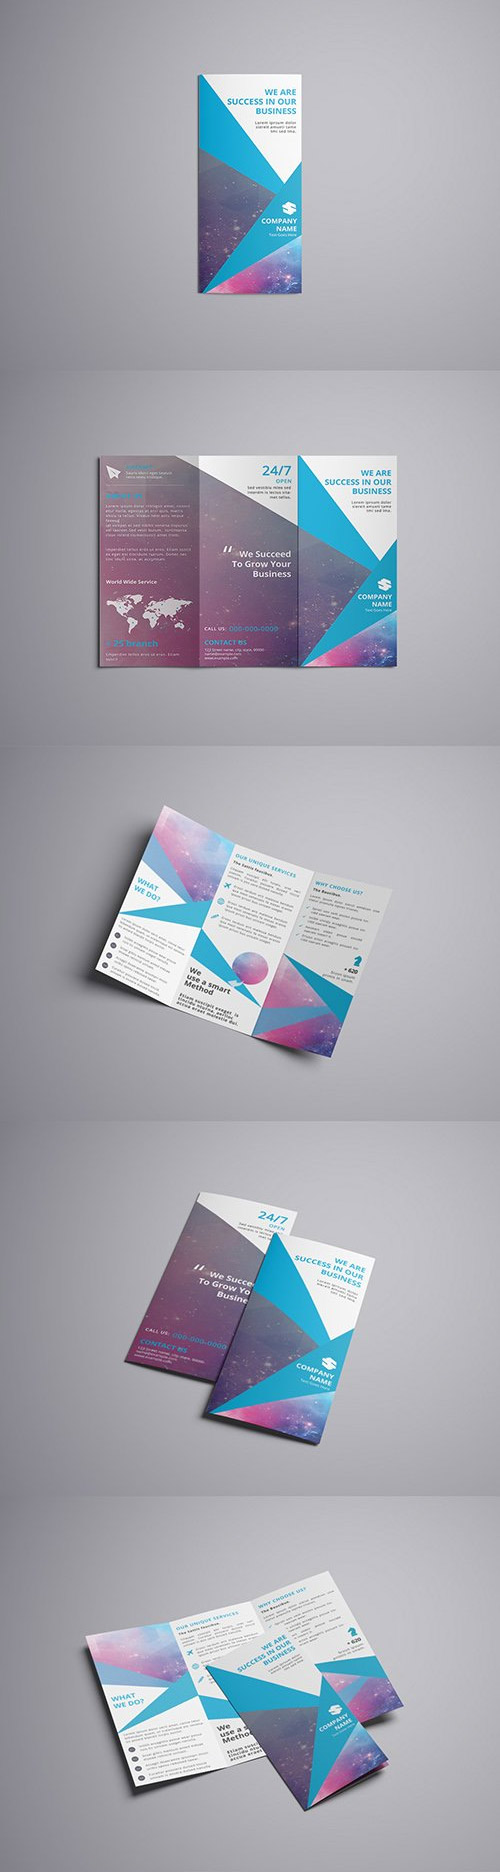 Trifold Brochure Layout with Blue Accents 3